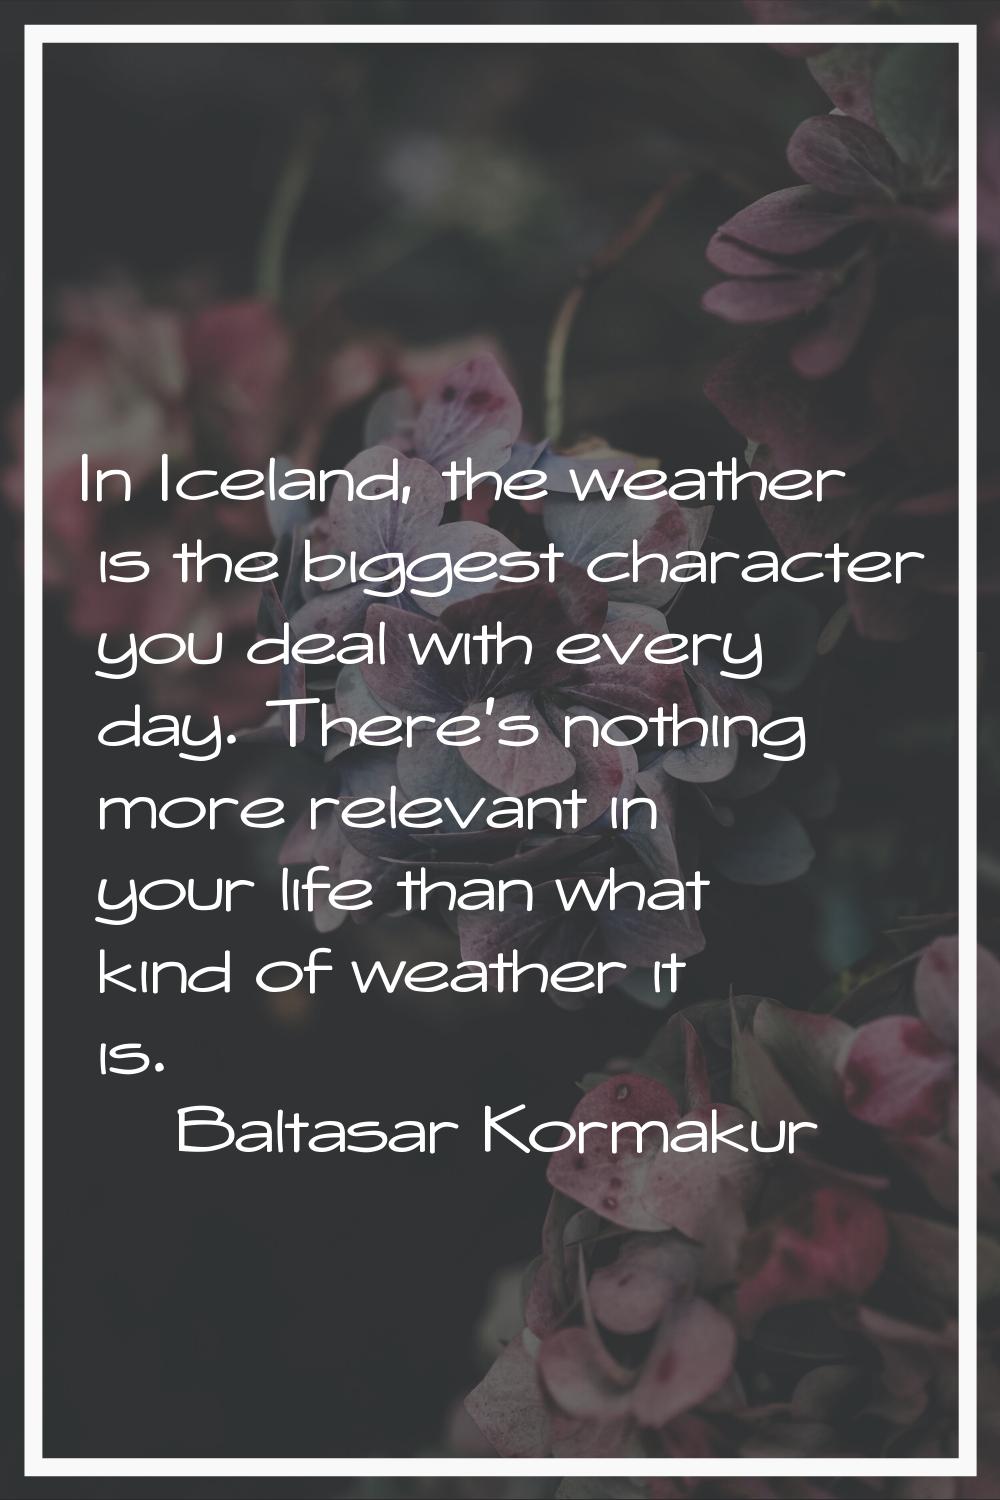 In Iceland, the weather is the biggest character you deal with every day. There's nothing more rele